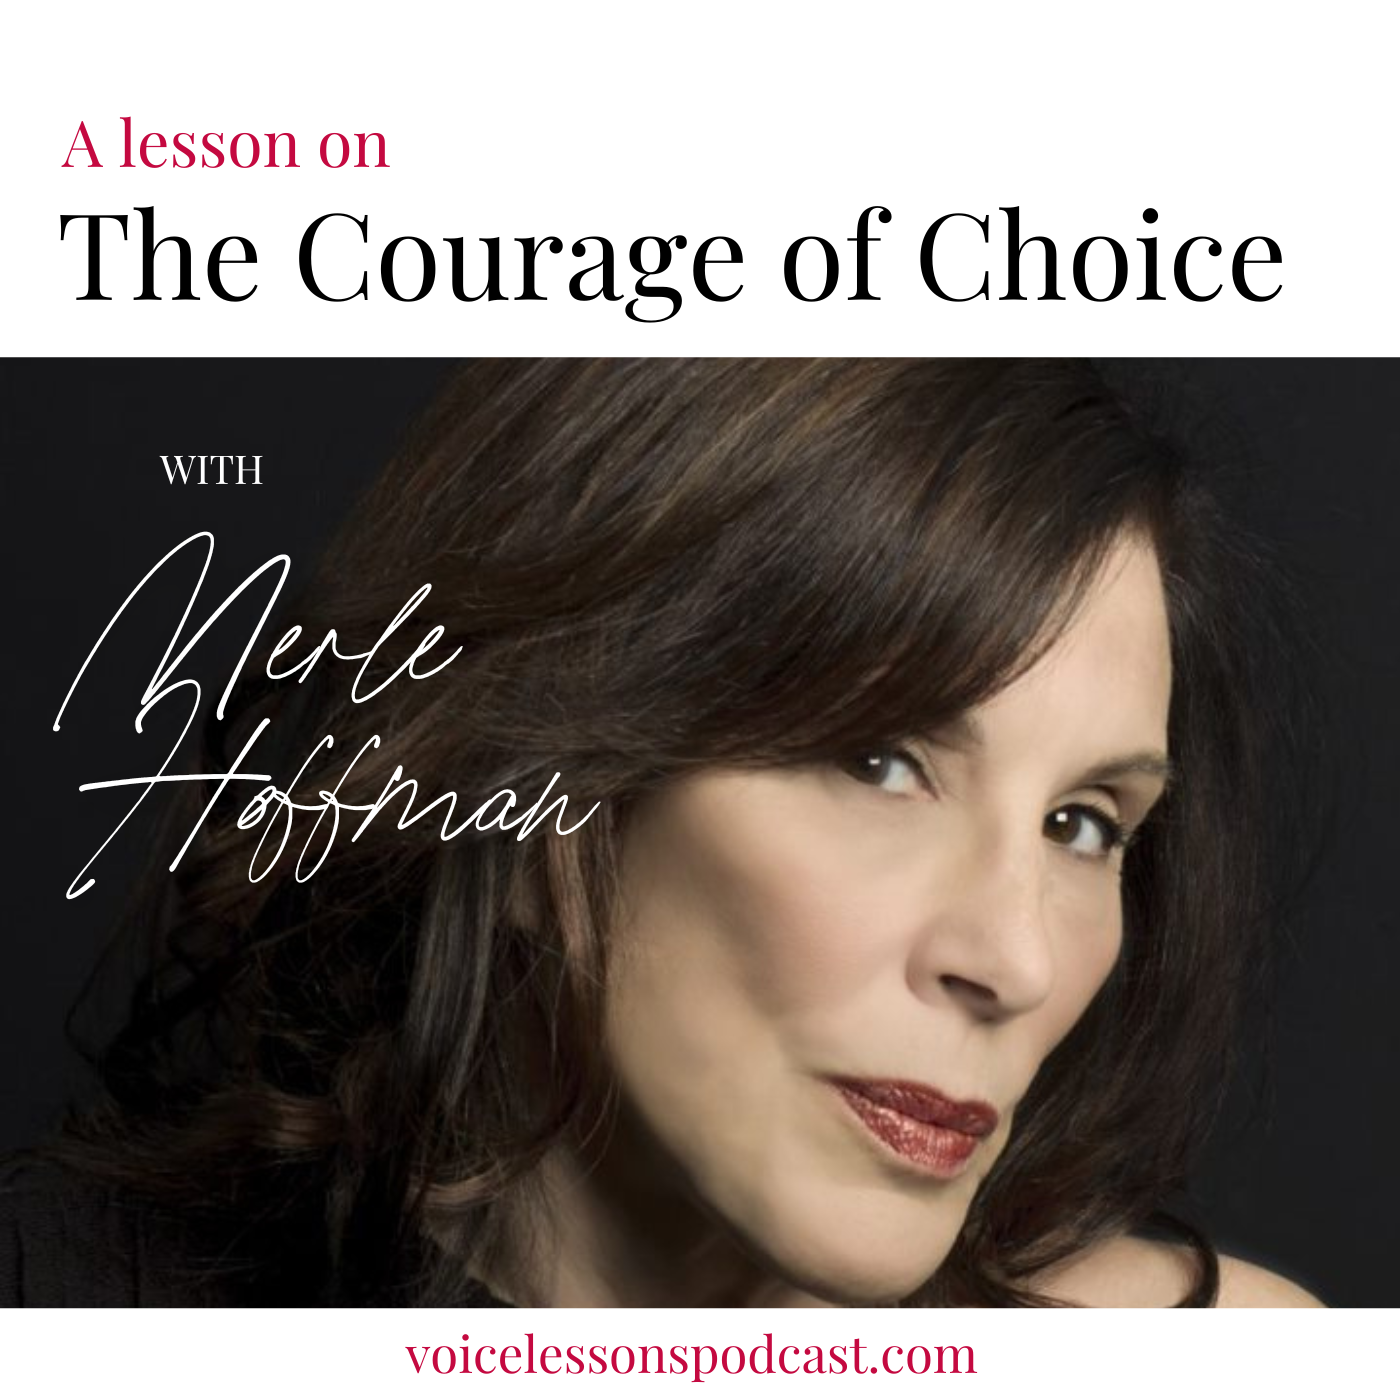 A_Voice_Lesson_On_The_Courage_of_Choice_Merle_Hoffman